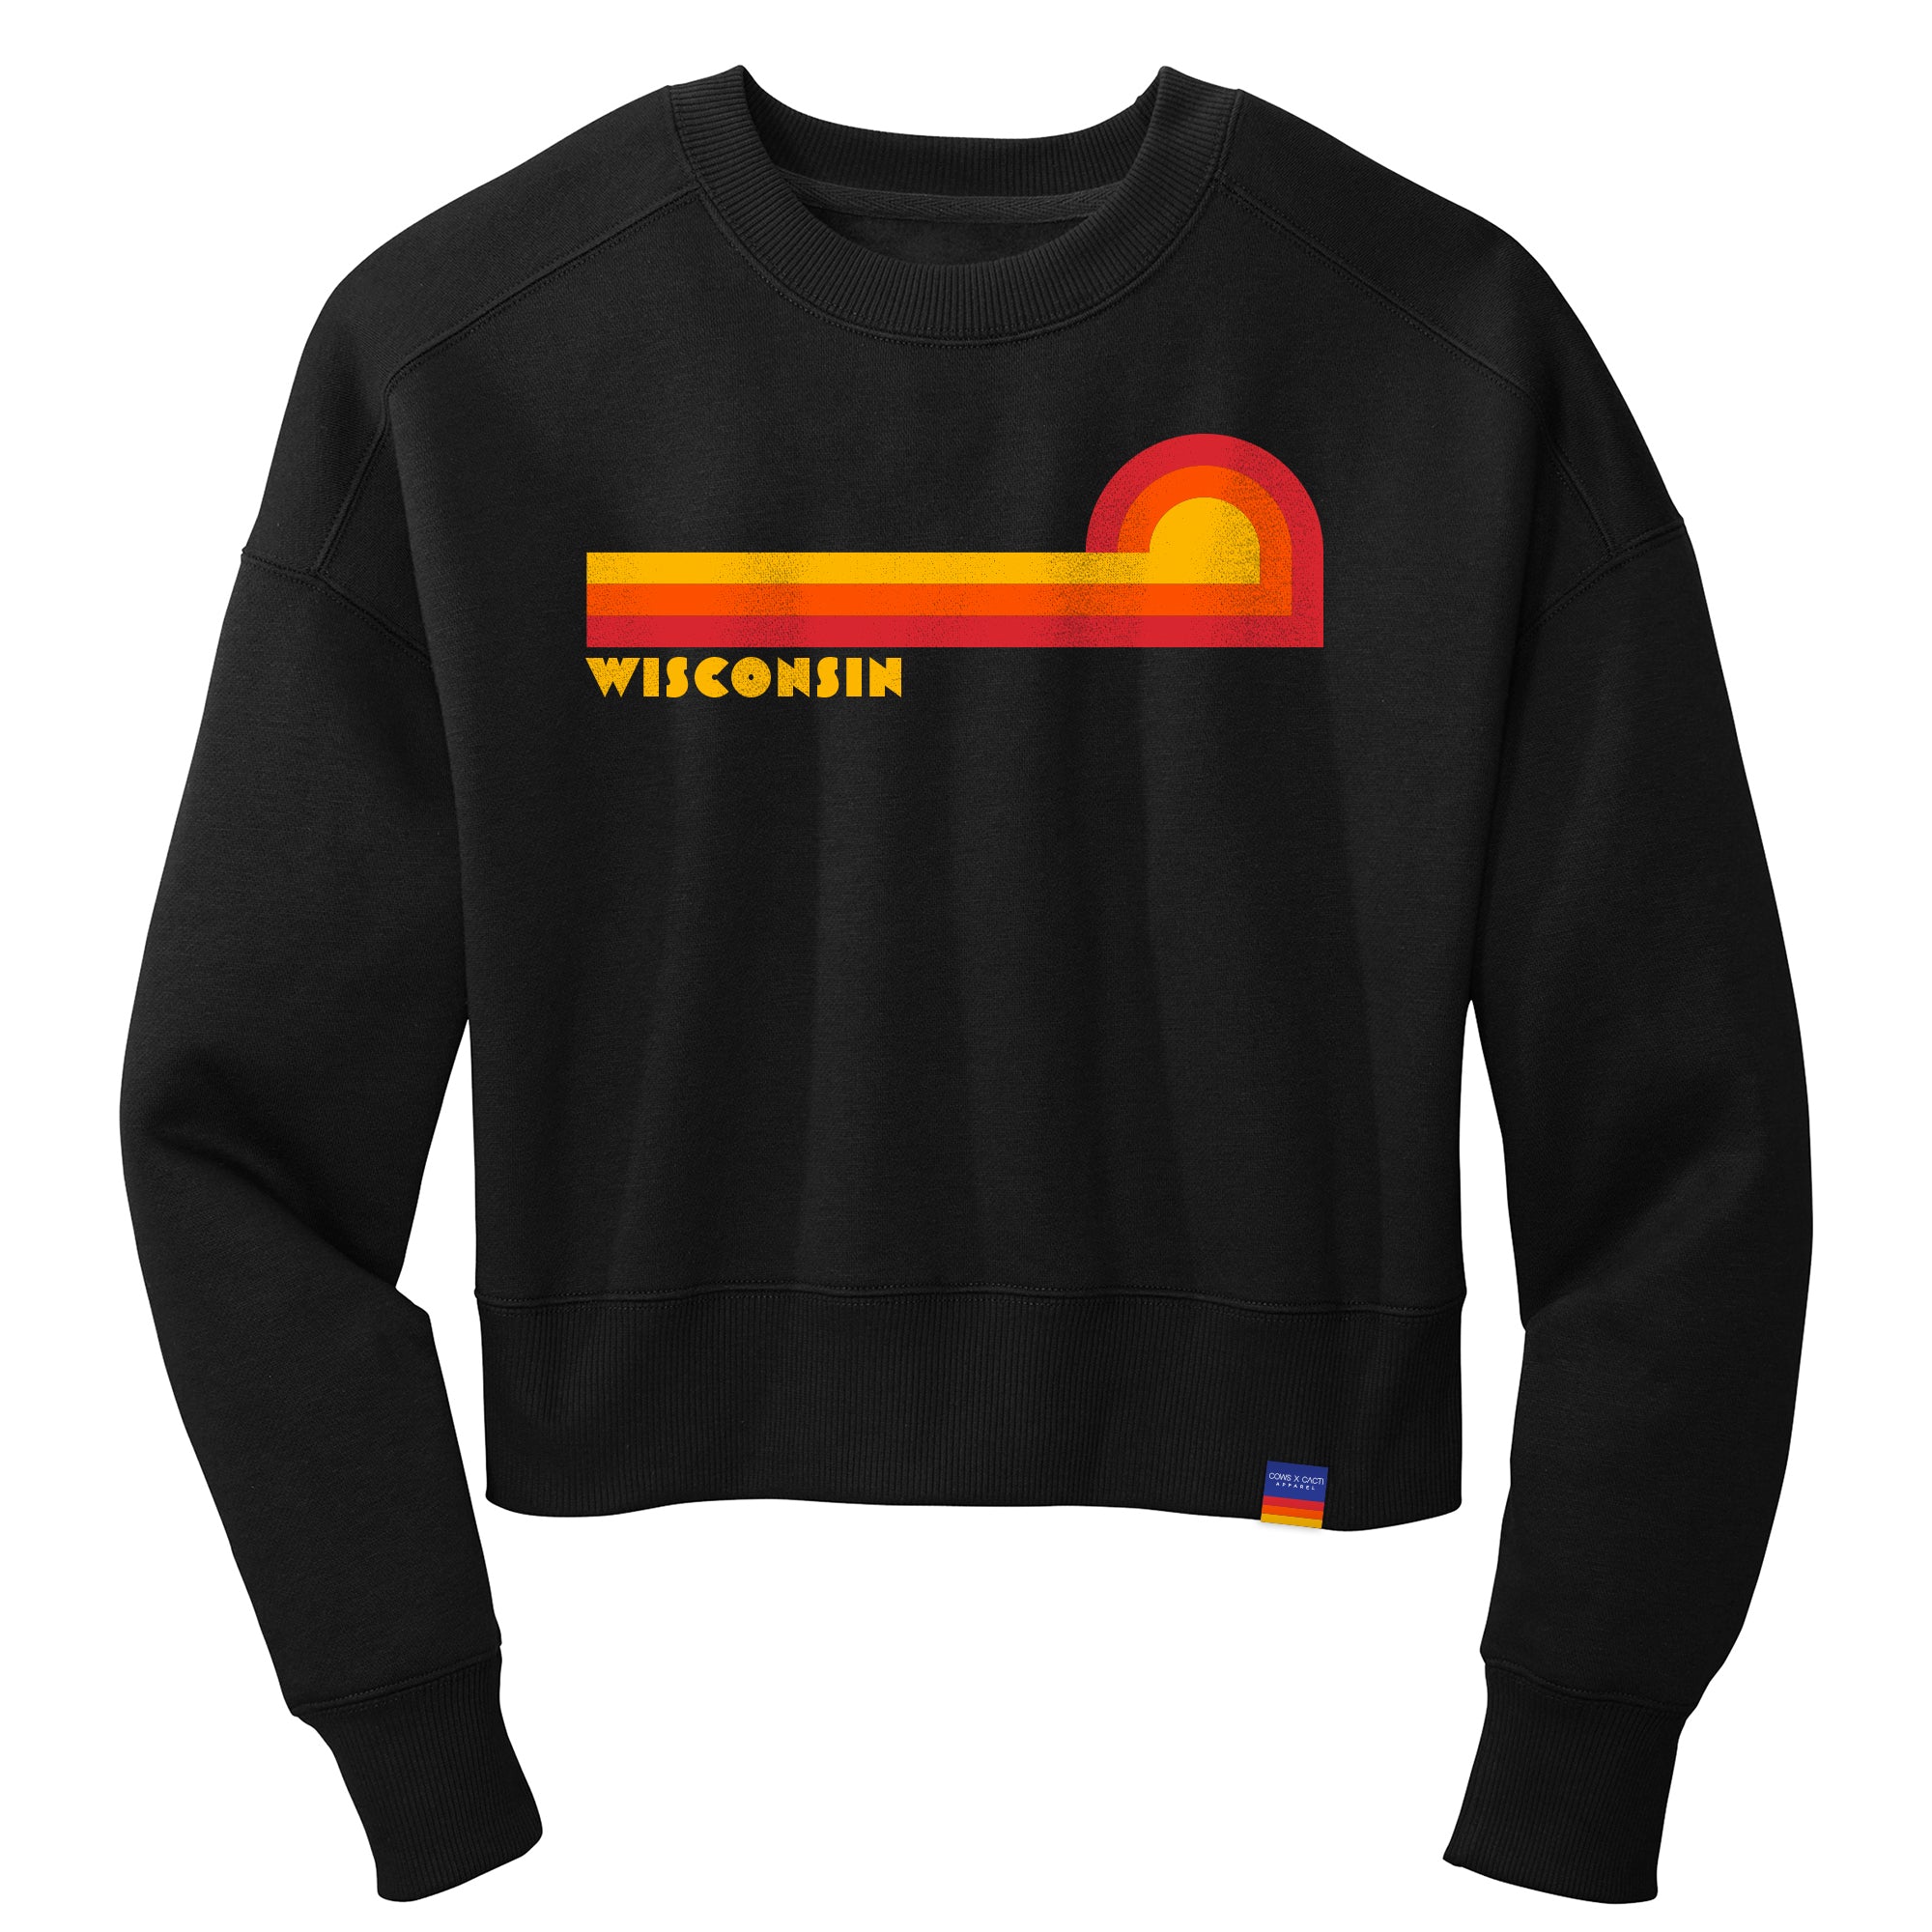 Wisconsin Sunset Black Cropped Crew